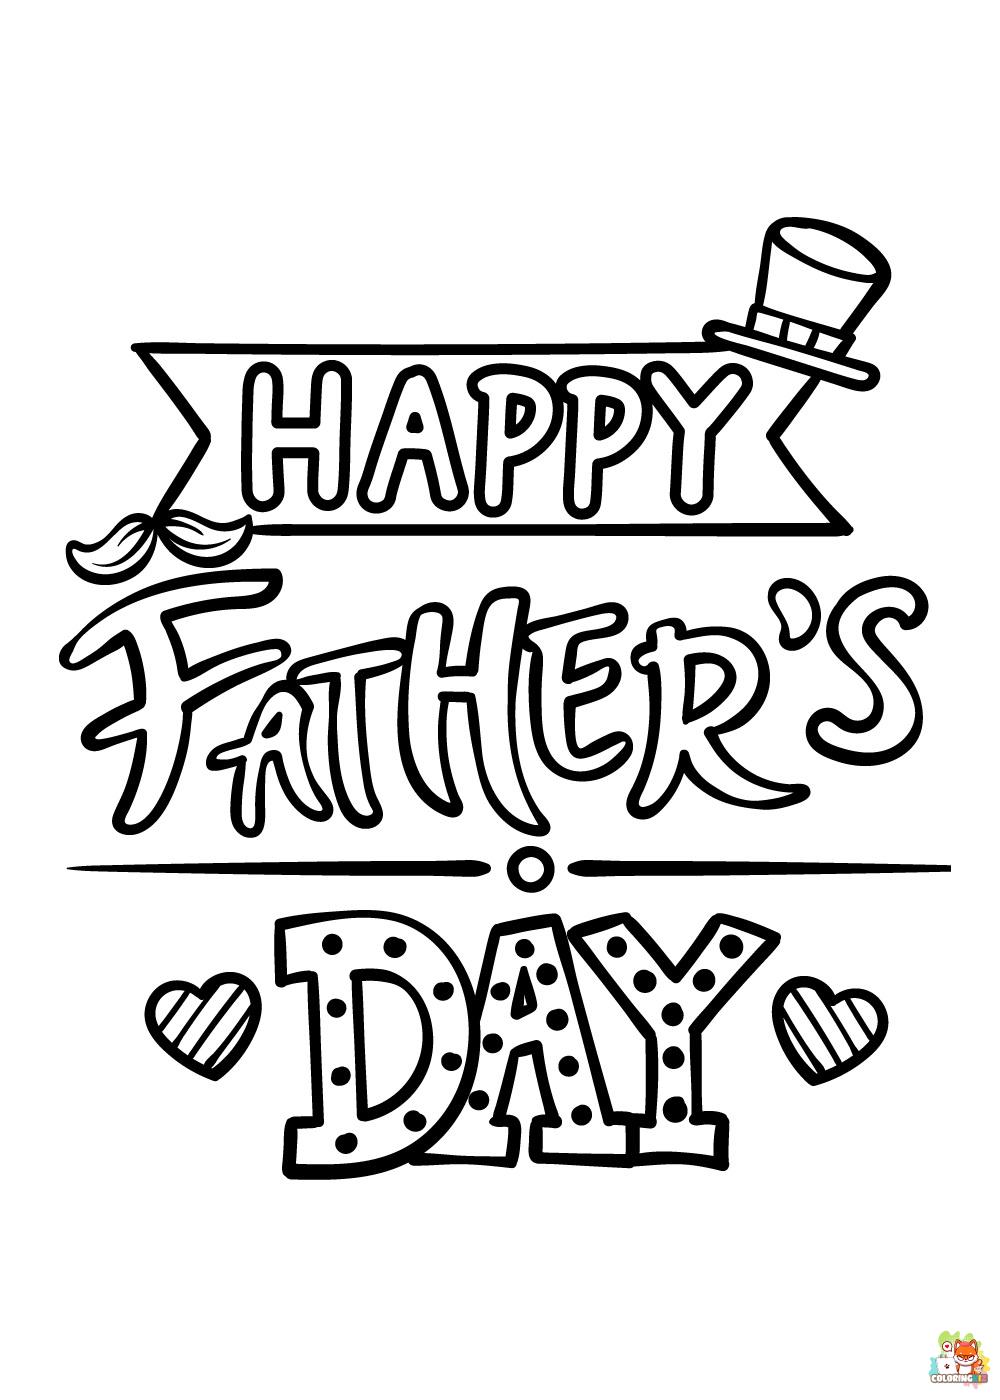 coloring pages fathers day